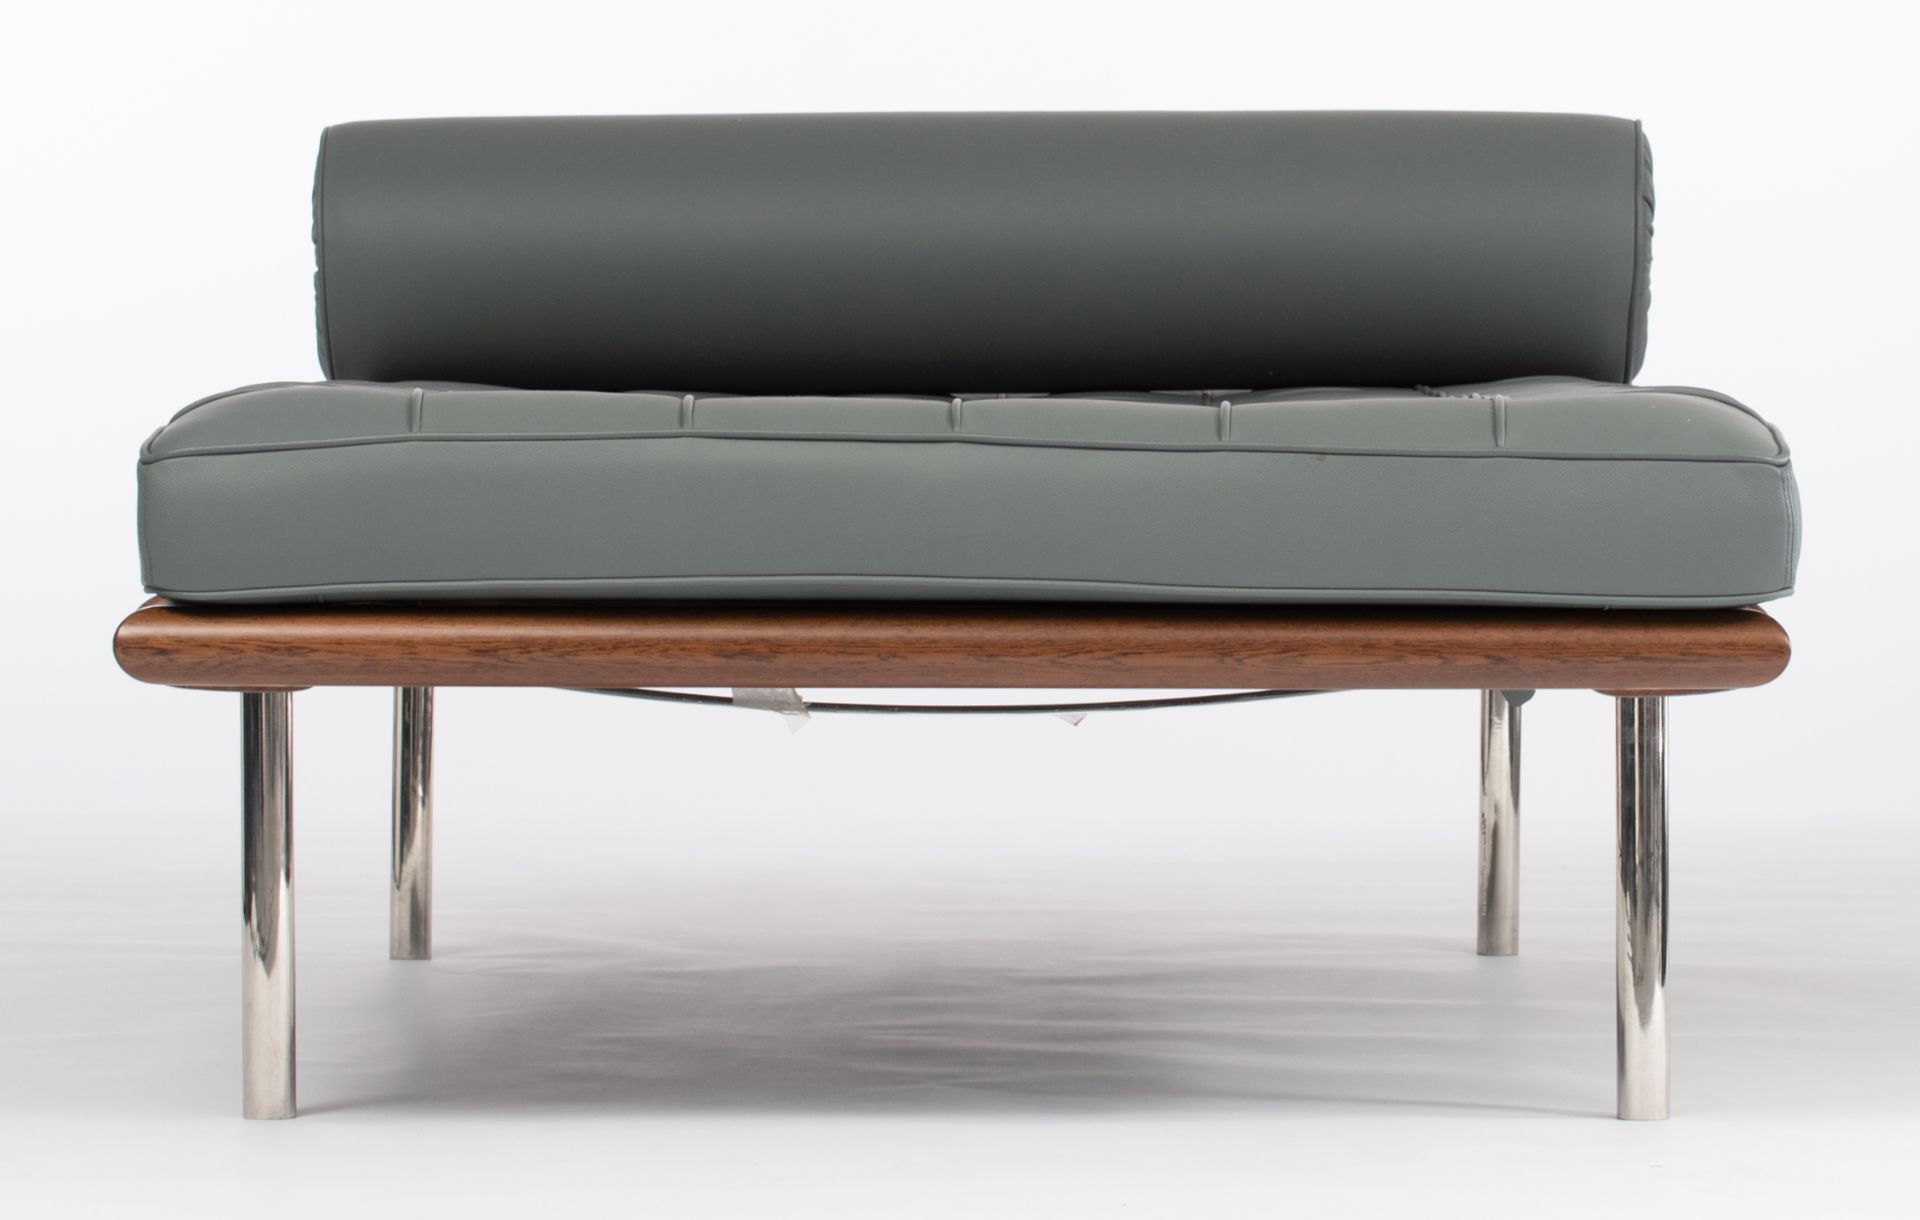 A grey leather upholstered Barcelona daybed, design by Ludwig Mies van der Rohe for Knoll Internatio - Bild 3 aus 10